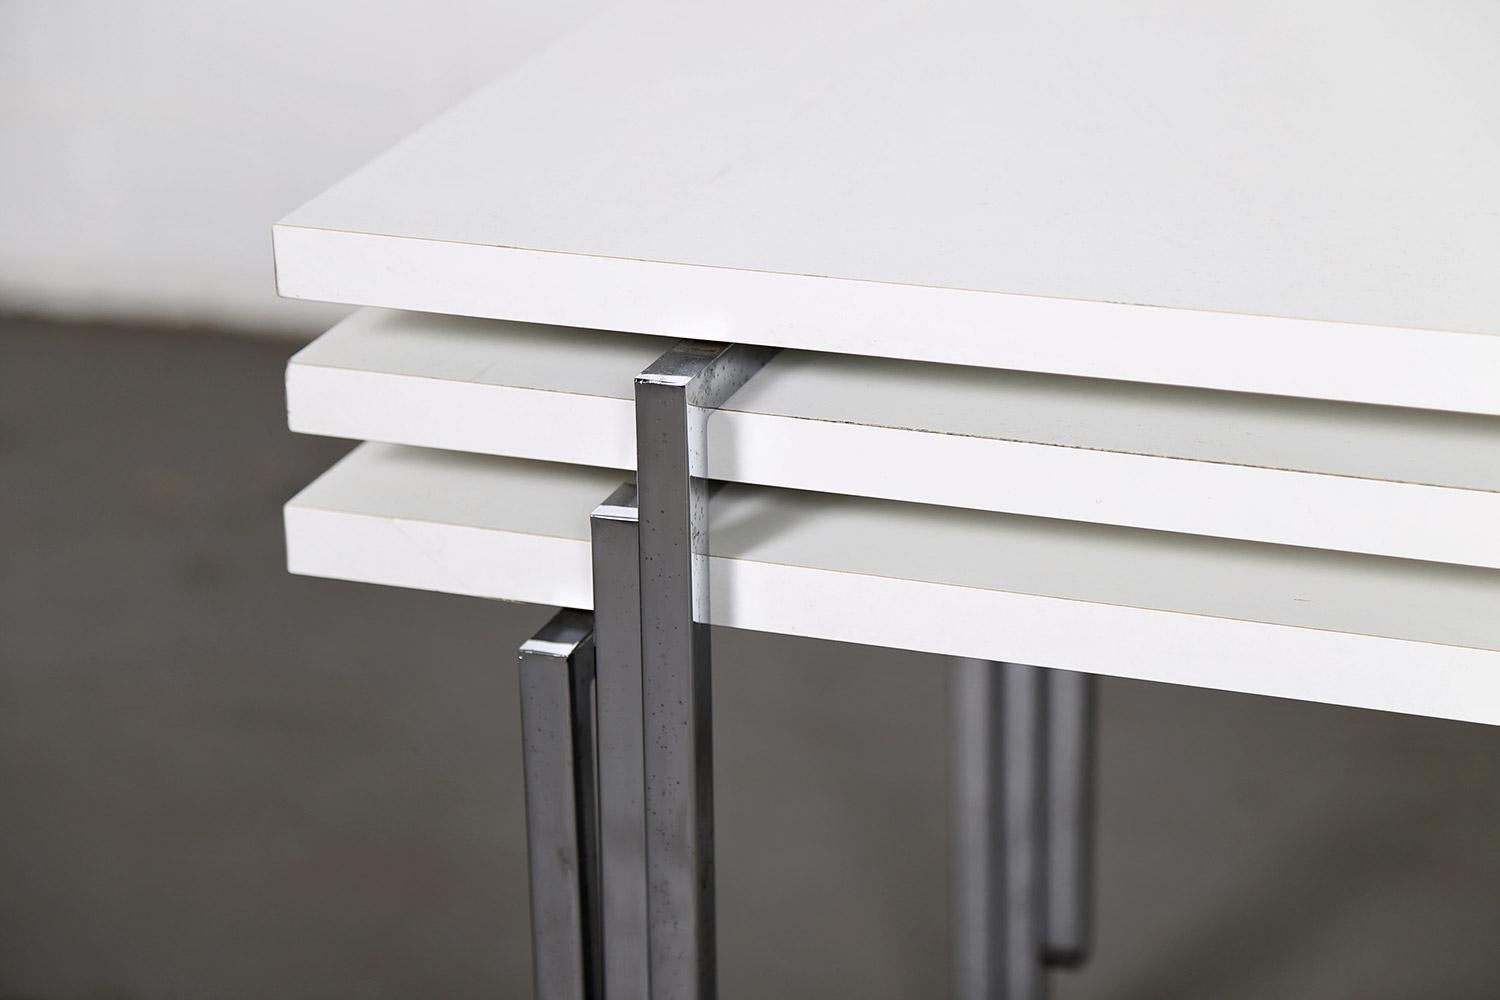 Three modernist stacking tables designed by Trix & Robert Haussmann for Swiss Form in the 60s.